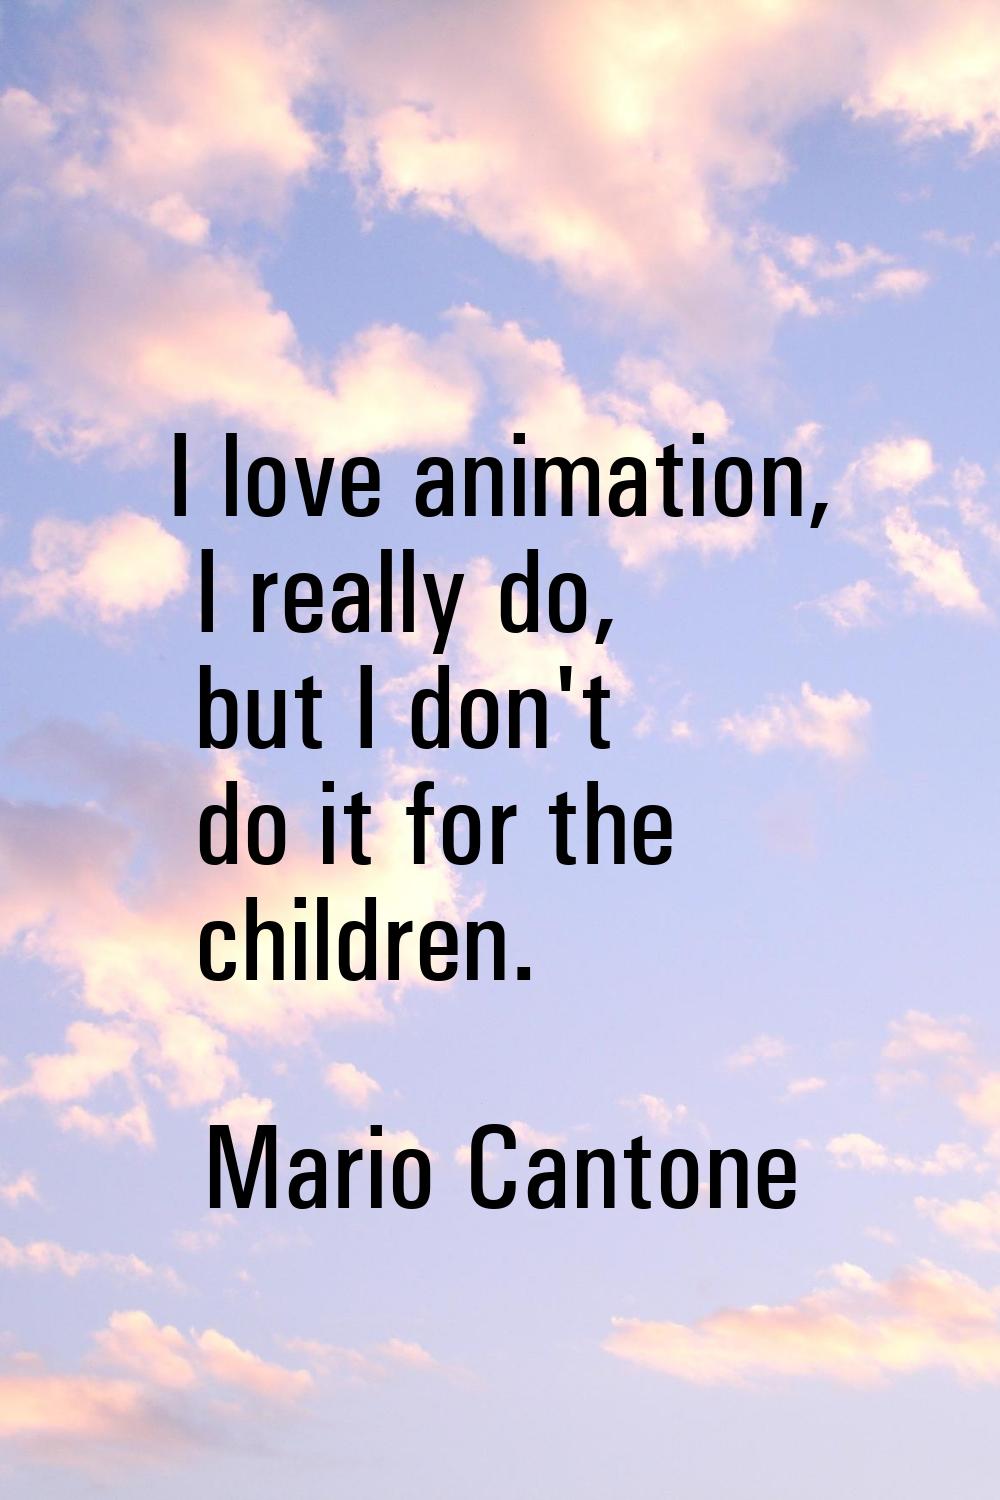 I love animation, I really do, but I don't do it for the children.